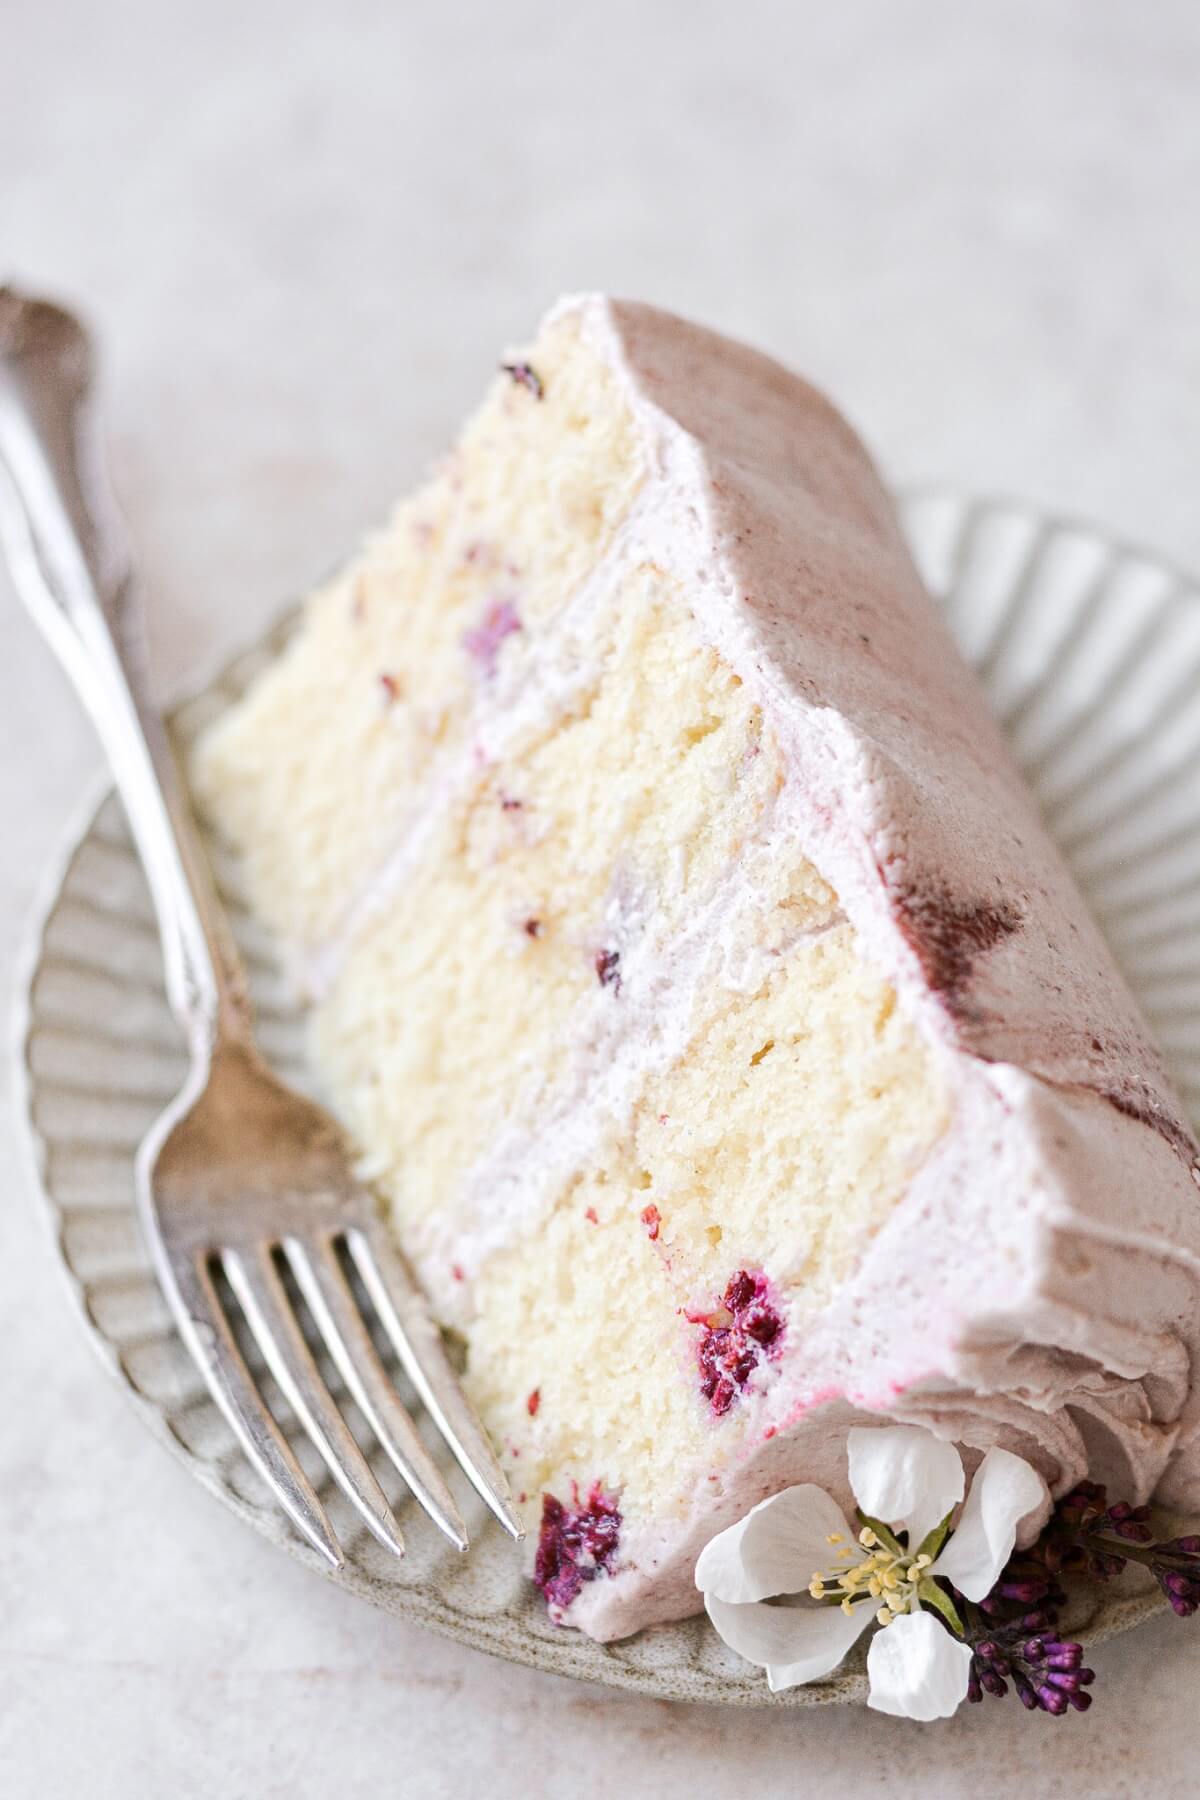 A slice of blackberry cake with a fork.